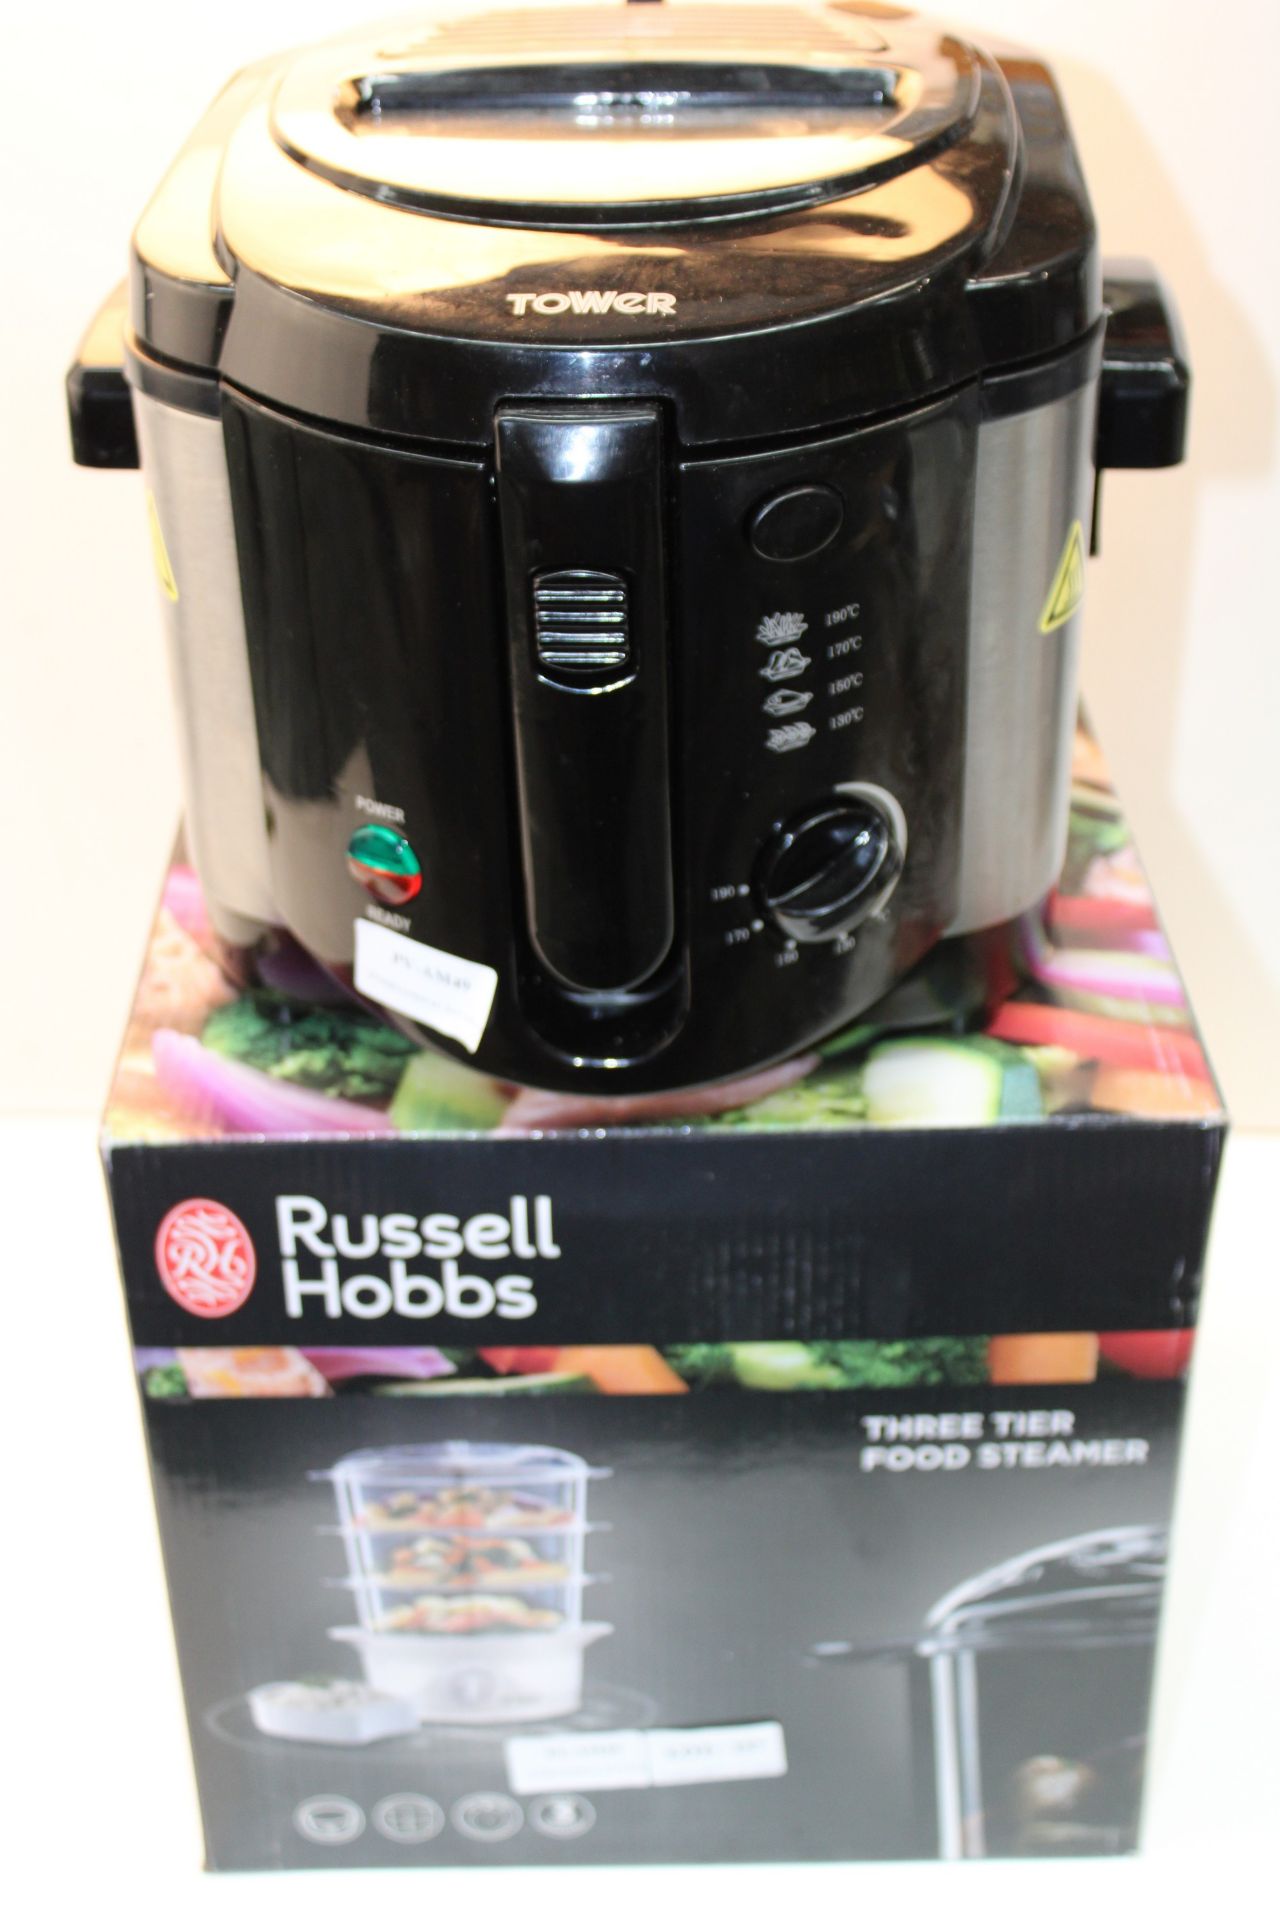 2X BOXED ASSORTED ITEMS BY TOWER & RUSSELL HOBBS (IMAGE DEPICTS STOCK)Condition ReportAppraisal